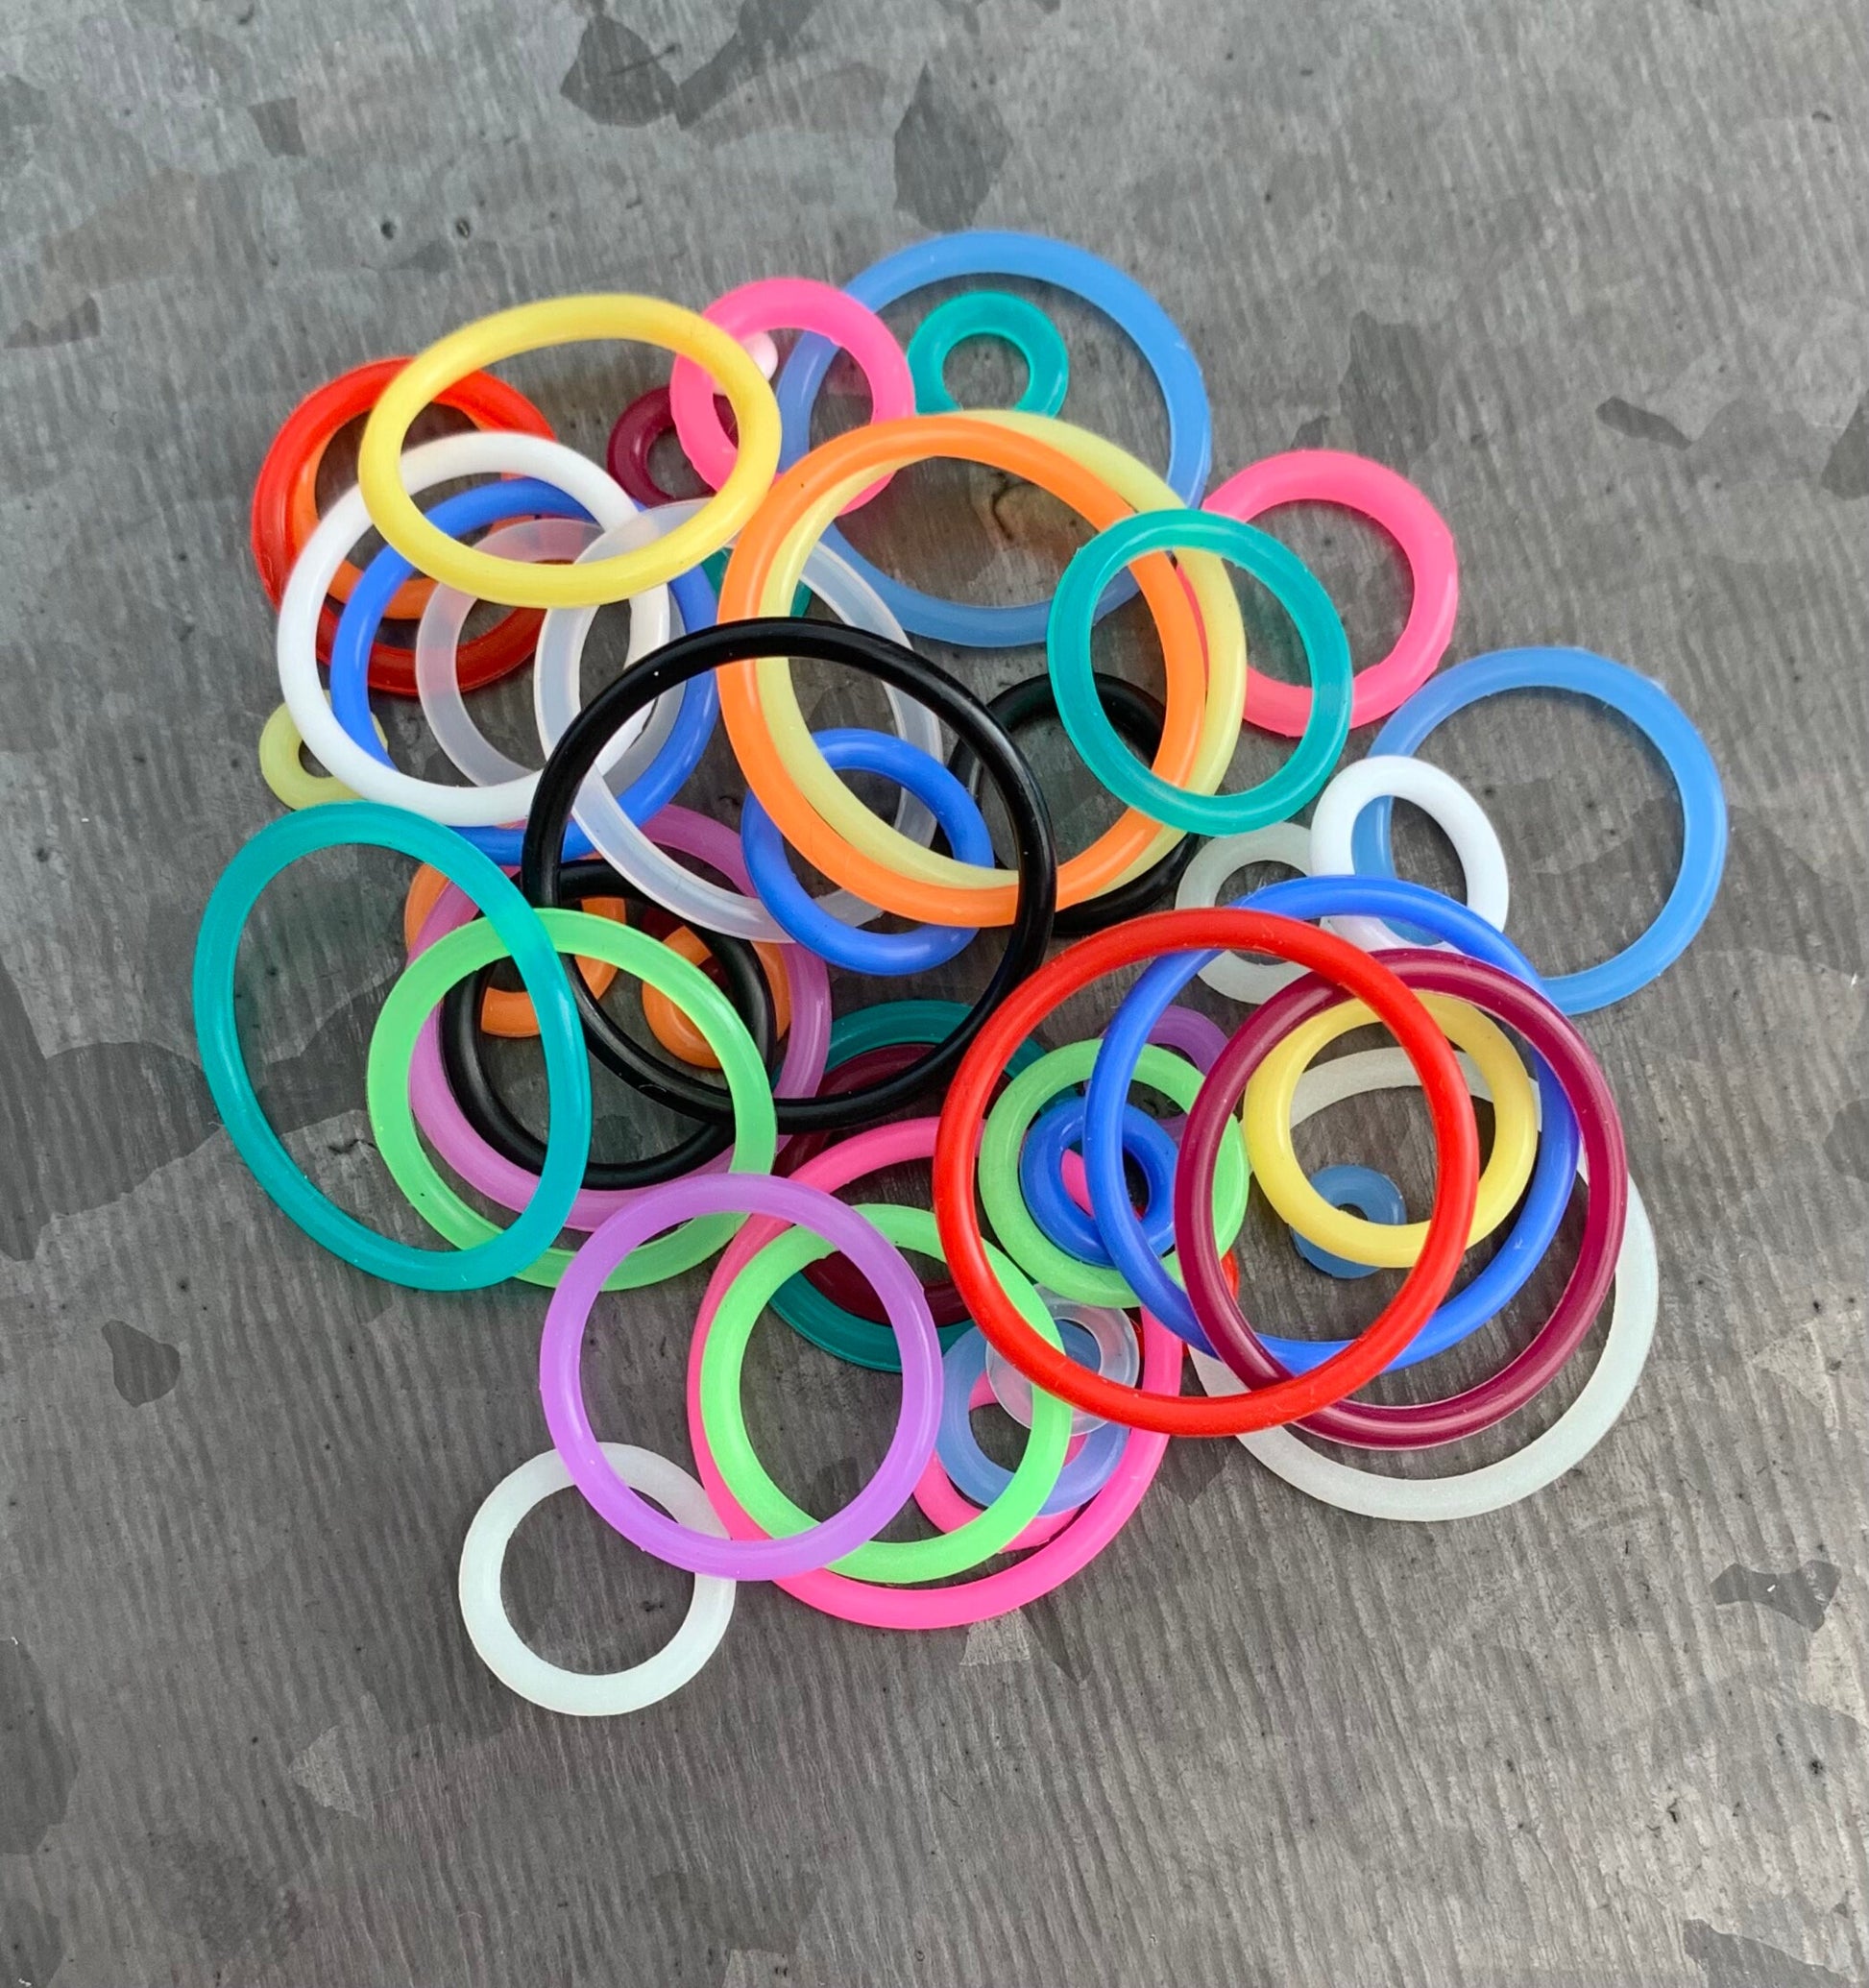 10 pack of White Replacement O-Rings Bands for Plugs or Tunnels - 13 more colors available!